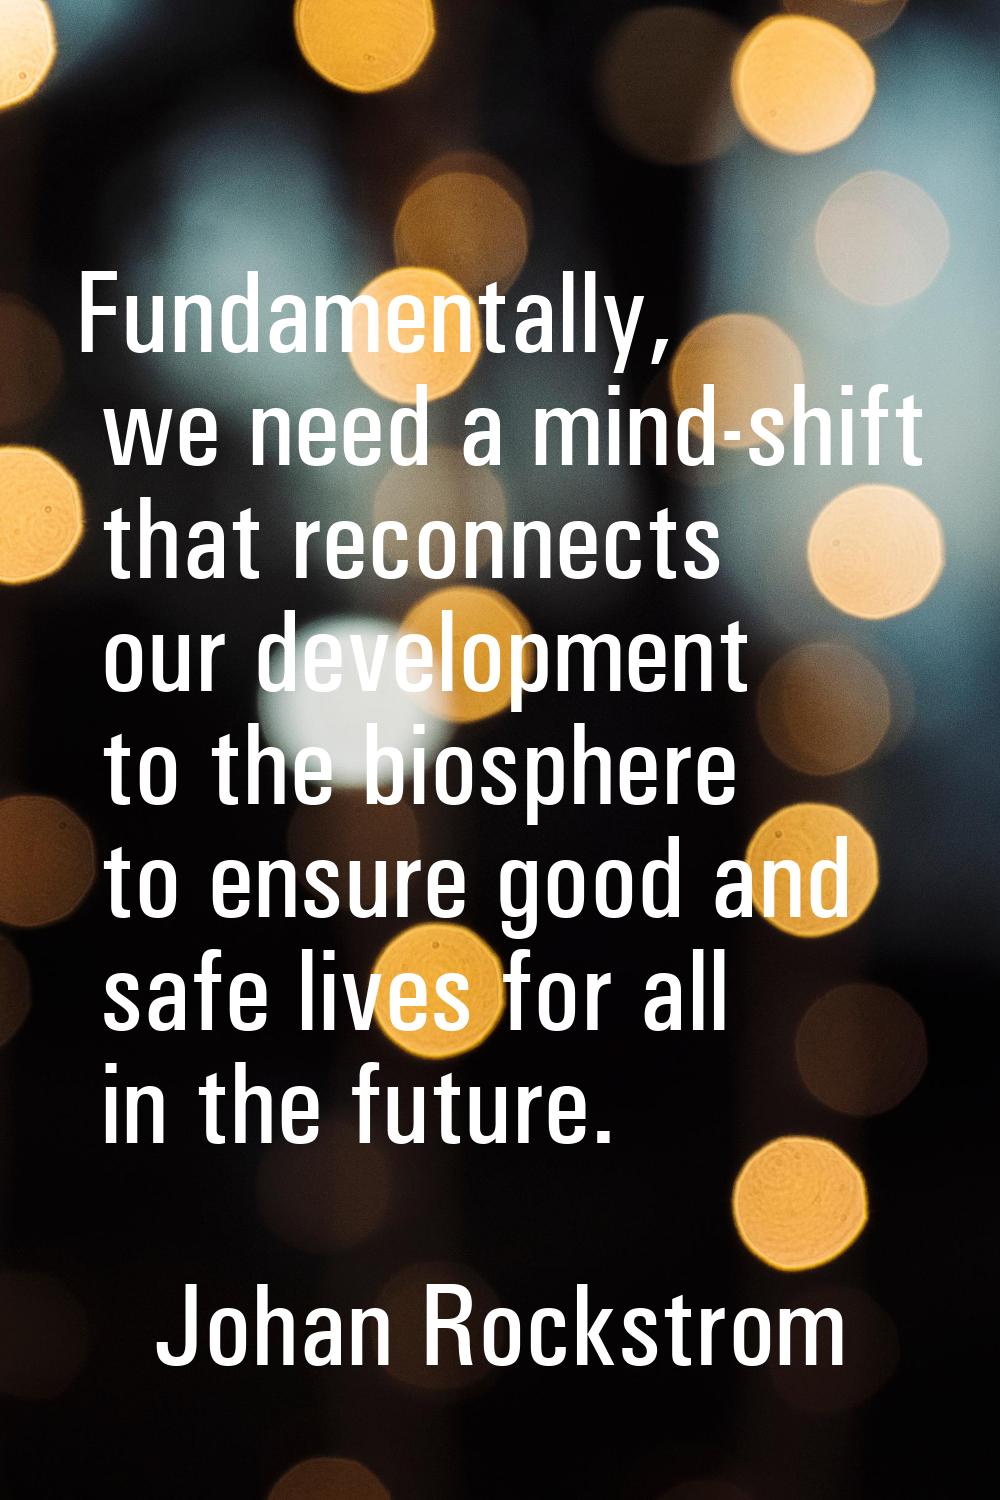 Fundamentally, we need a mind-shift that reconnects our development to the biosphere to ensure good